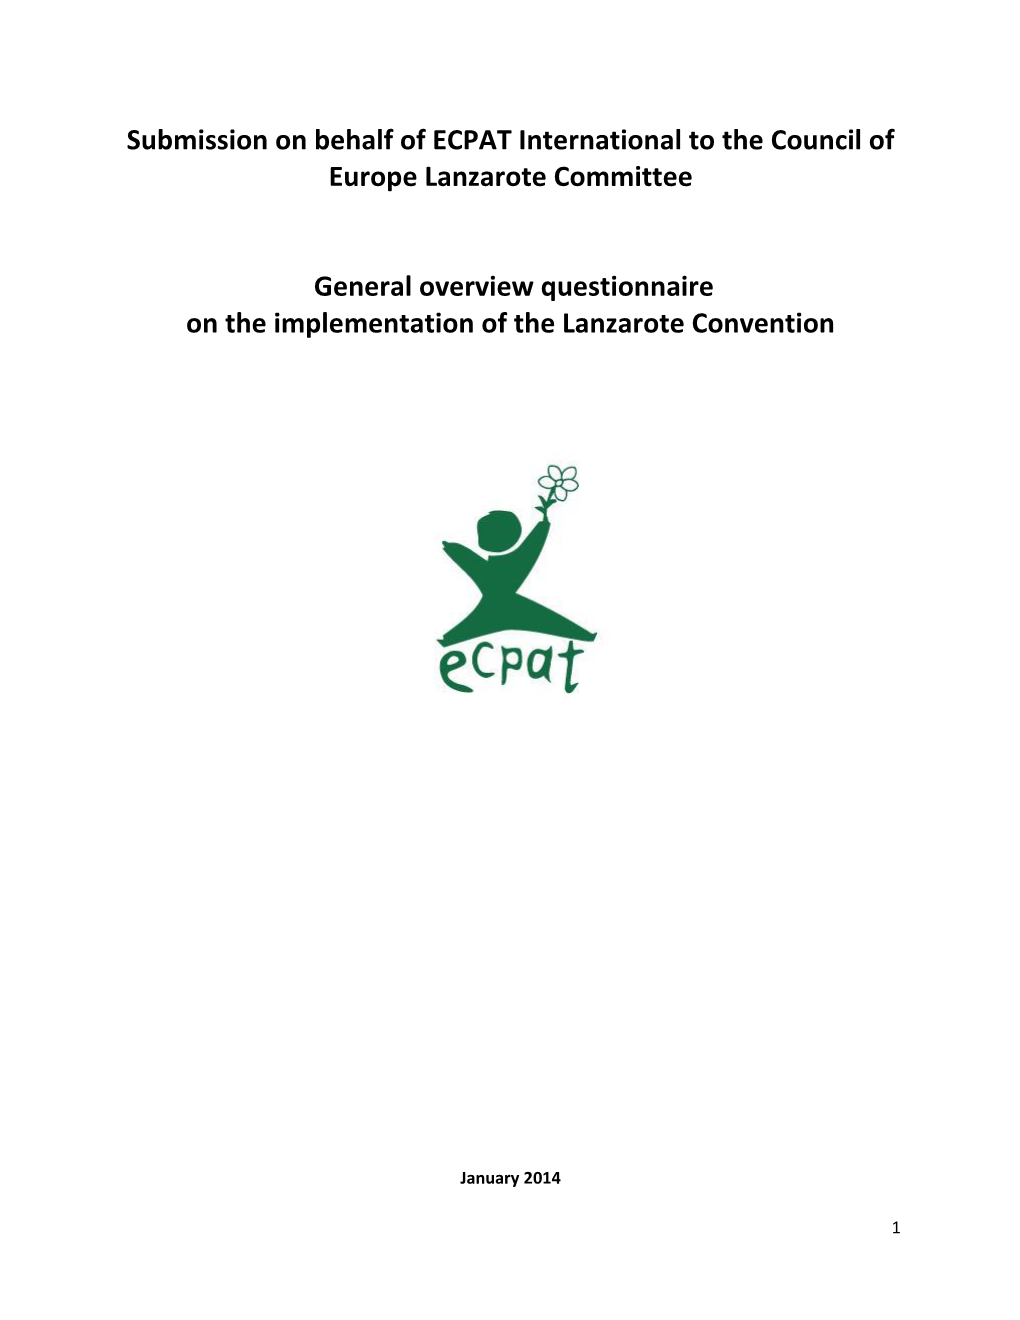 ECPAT International to the Council of Europe Lanzarote Committee